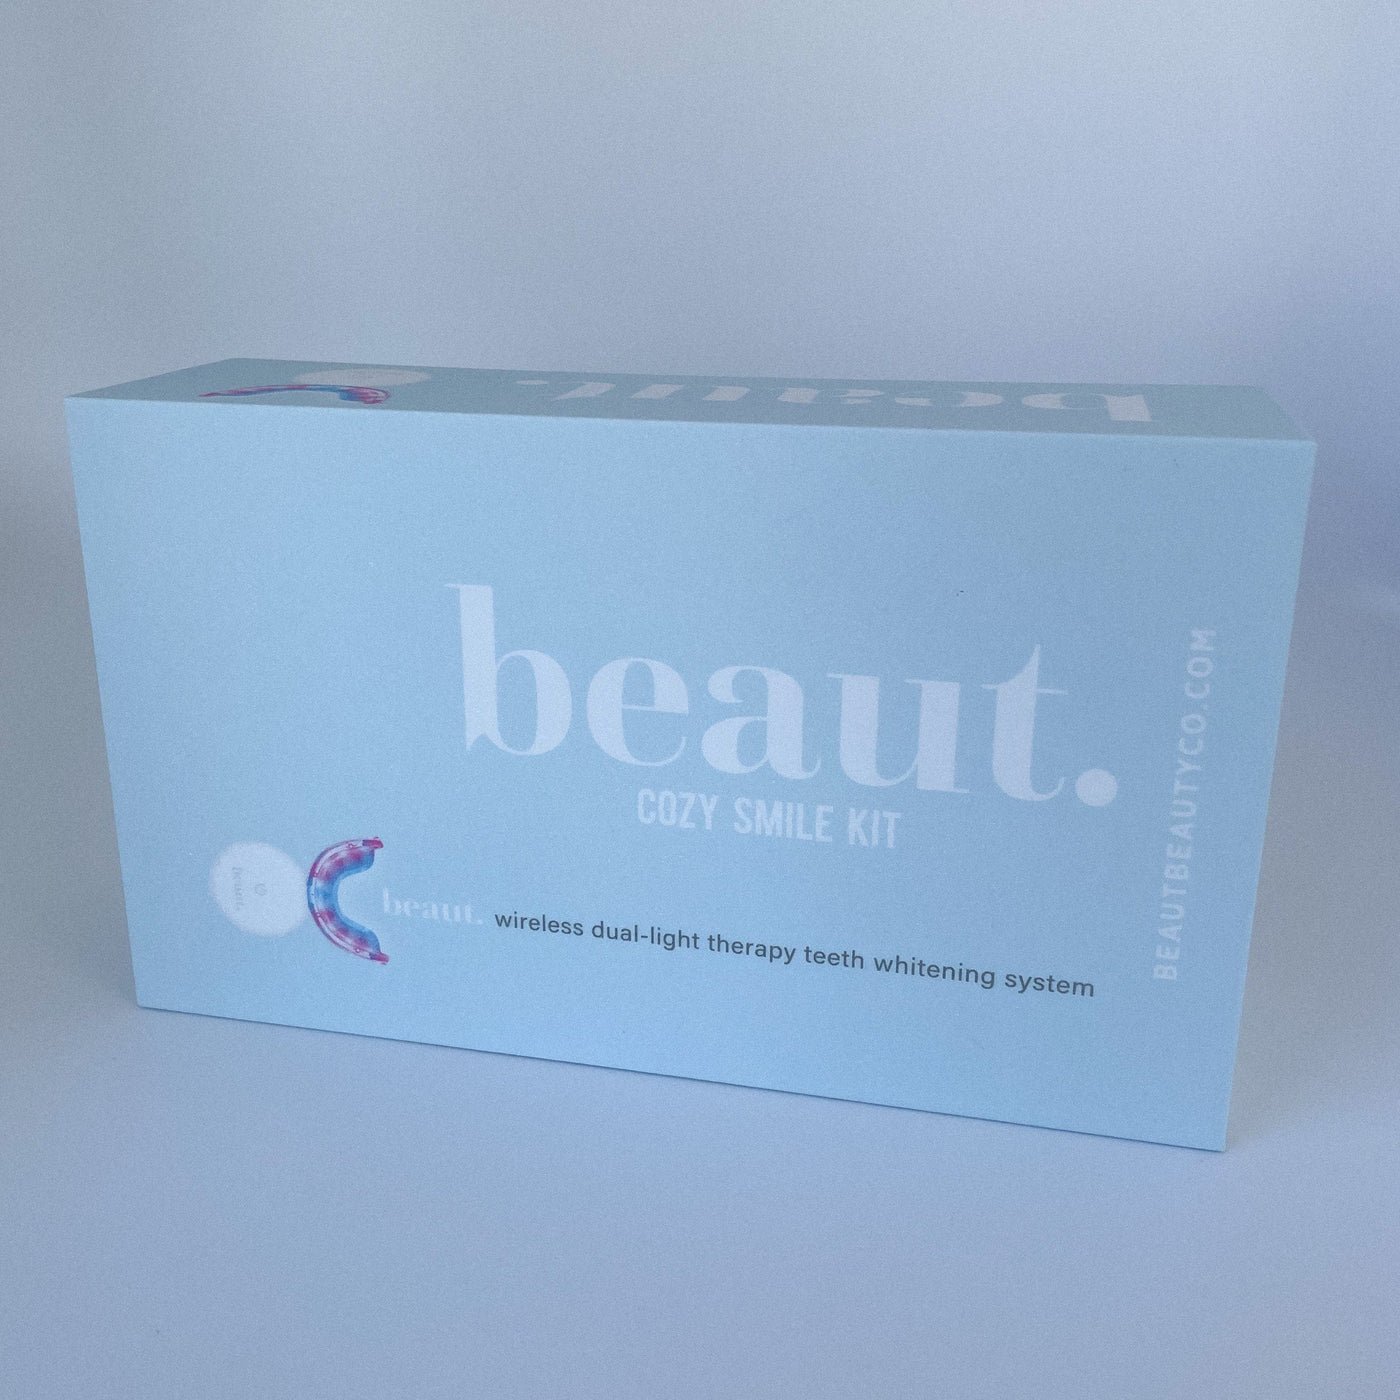 Cozy Smile Kit by beaut.